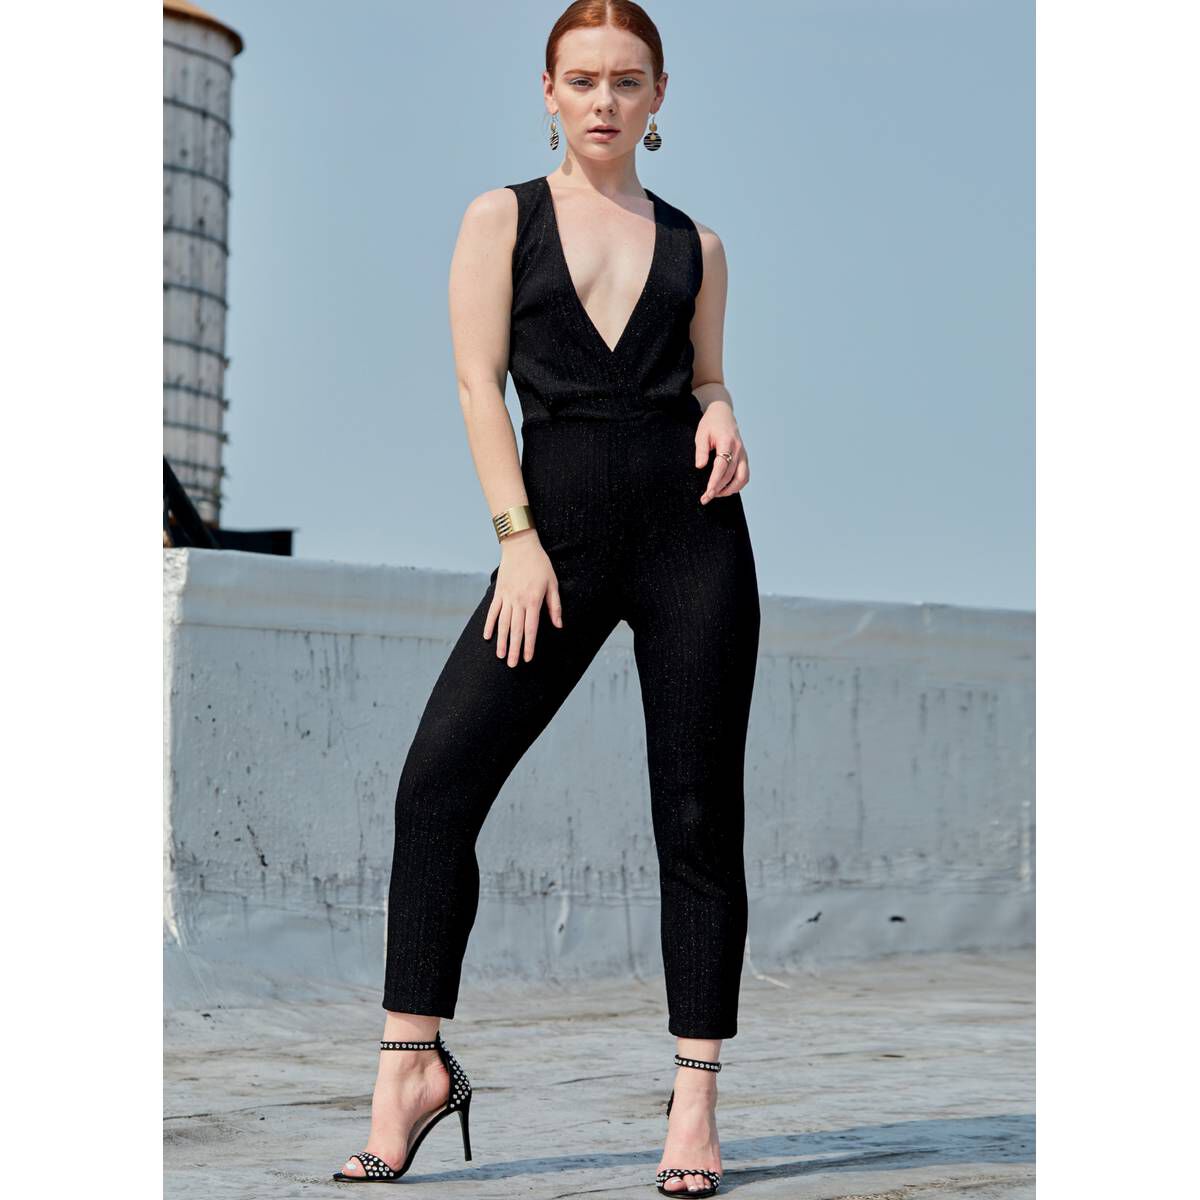 McCall’s Women’s Jumpsuits Sewing Pattern M7910 (6-14) | Hobbycraft